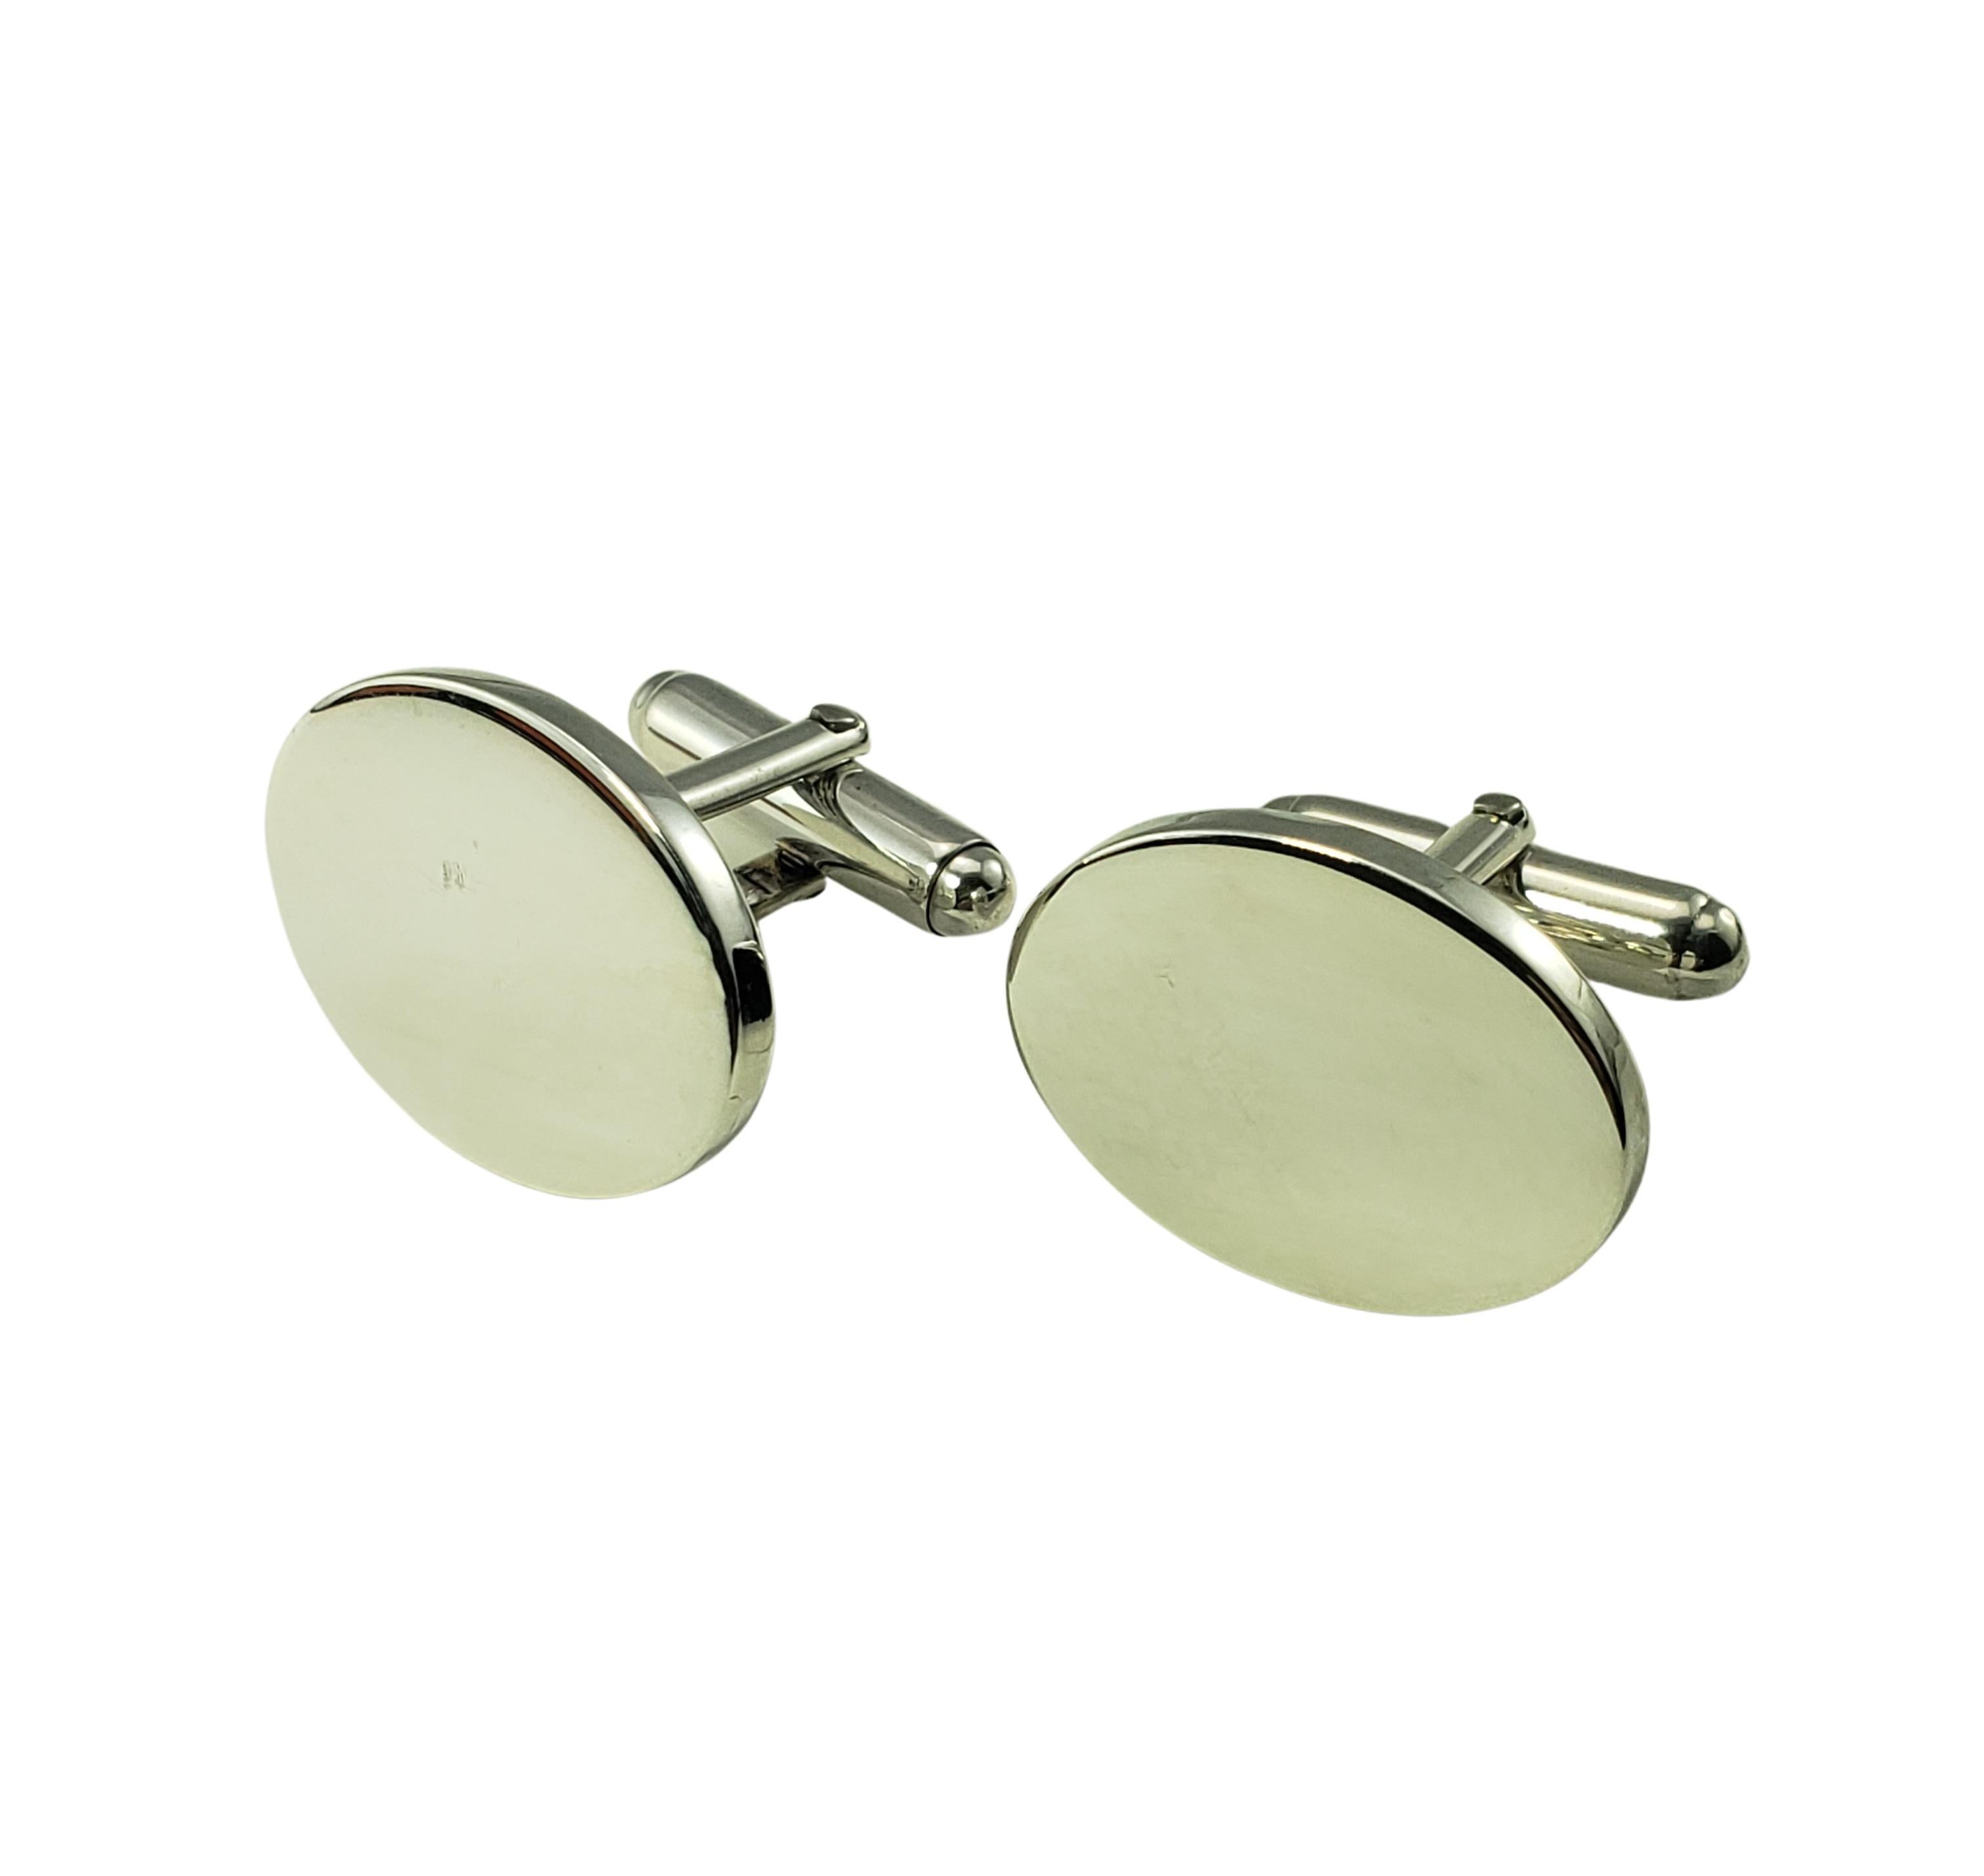 Tiffany & Co. Sterling Silver Cufflinks-

These elegant cufflinks by Tiffany and Co. are set in beautifully sterling silver.

Size:  21 mm x 16 mm

Weight:   10.1 dwt. / 15.8 gr.

Hallmark:  Tiffany & Co  925

Very good condition with slight surface